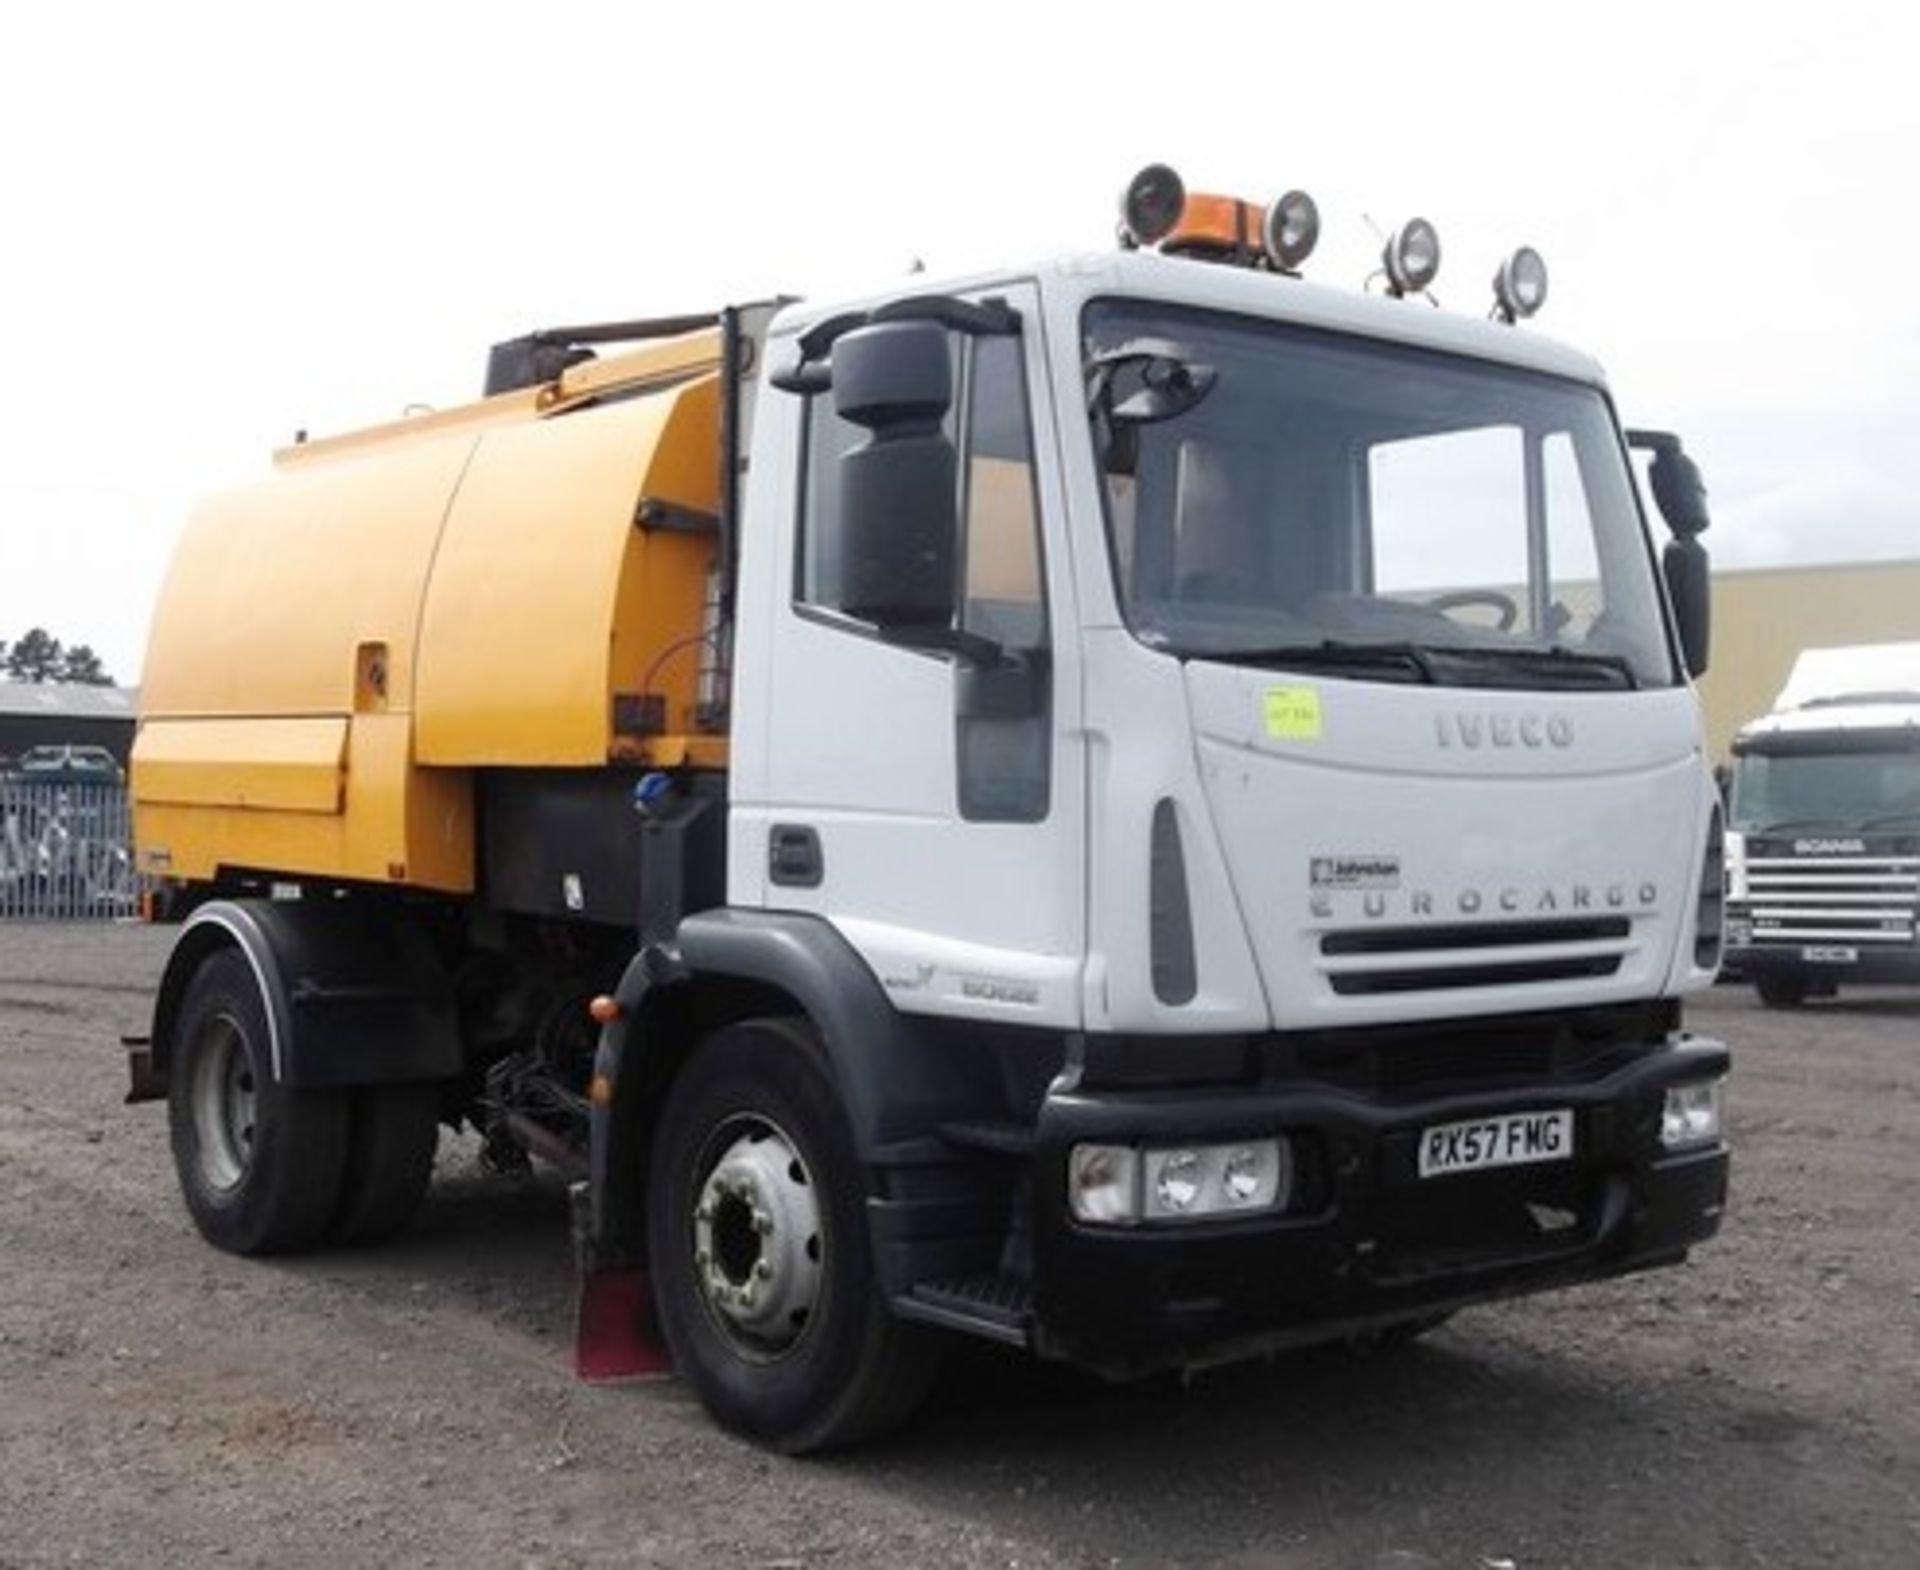 IVECO EUROCARGO - 5880cc
Body: 2 Dr Truck
Color: White
First Reg: 08/10/2007
Doors: 2
MOT: 
Mileage: - Image 9 of 11